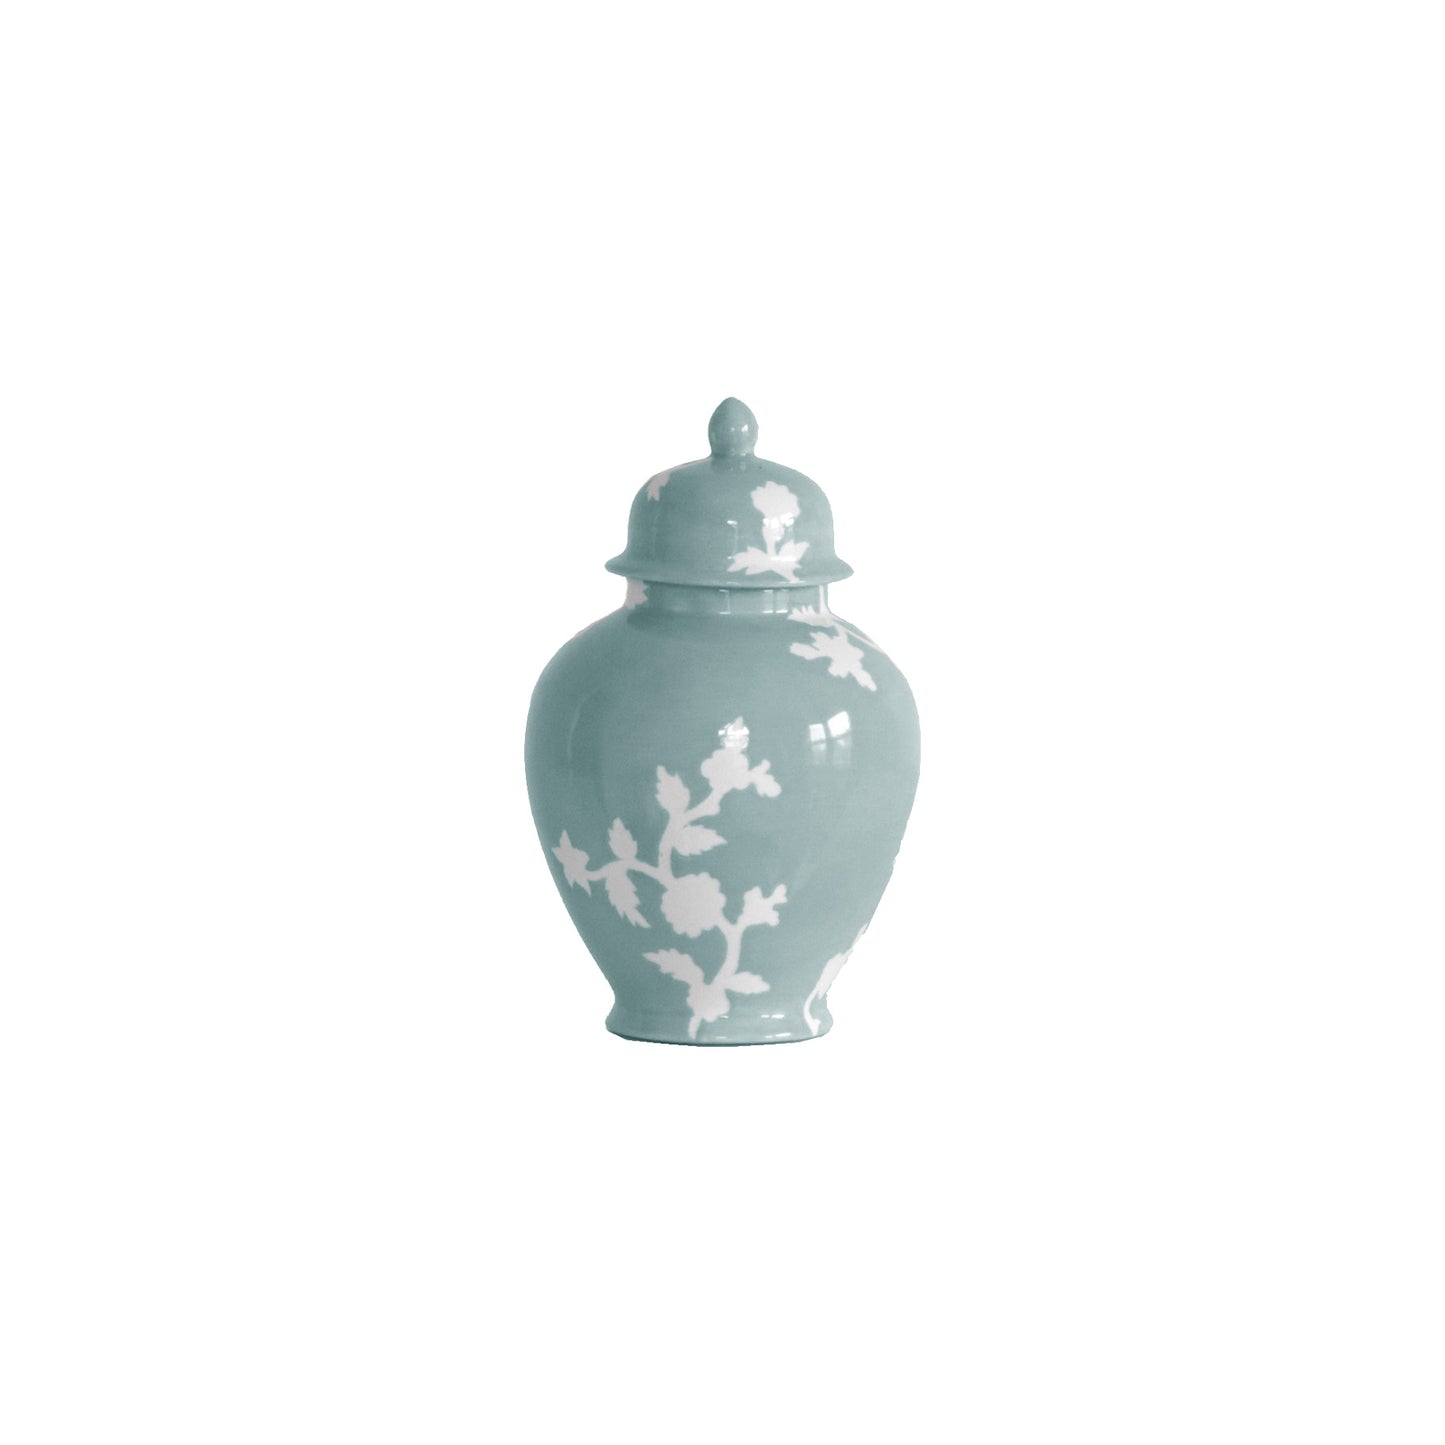 Chinoiserie Dreams Ginger Jars in Lamb's Ear Blue